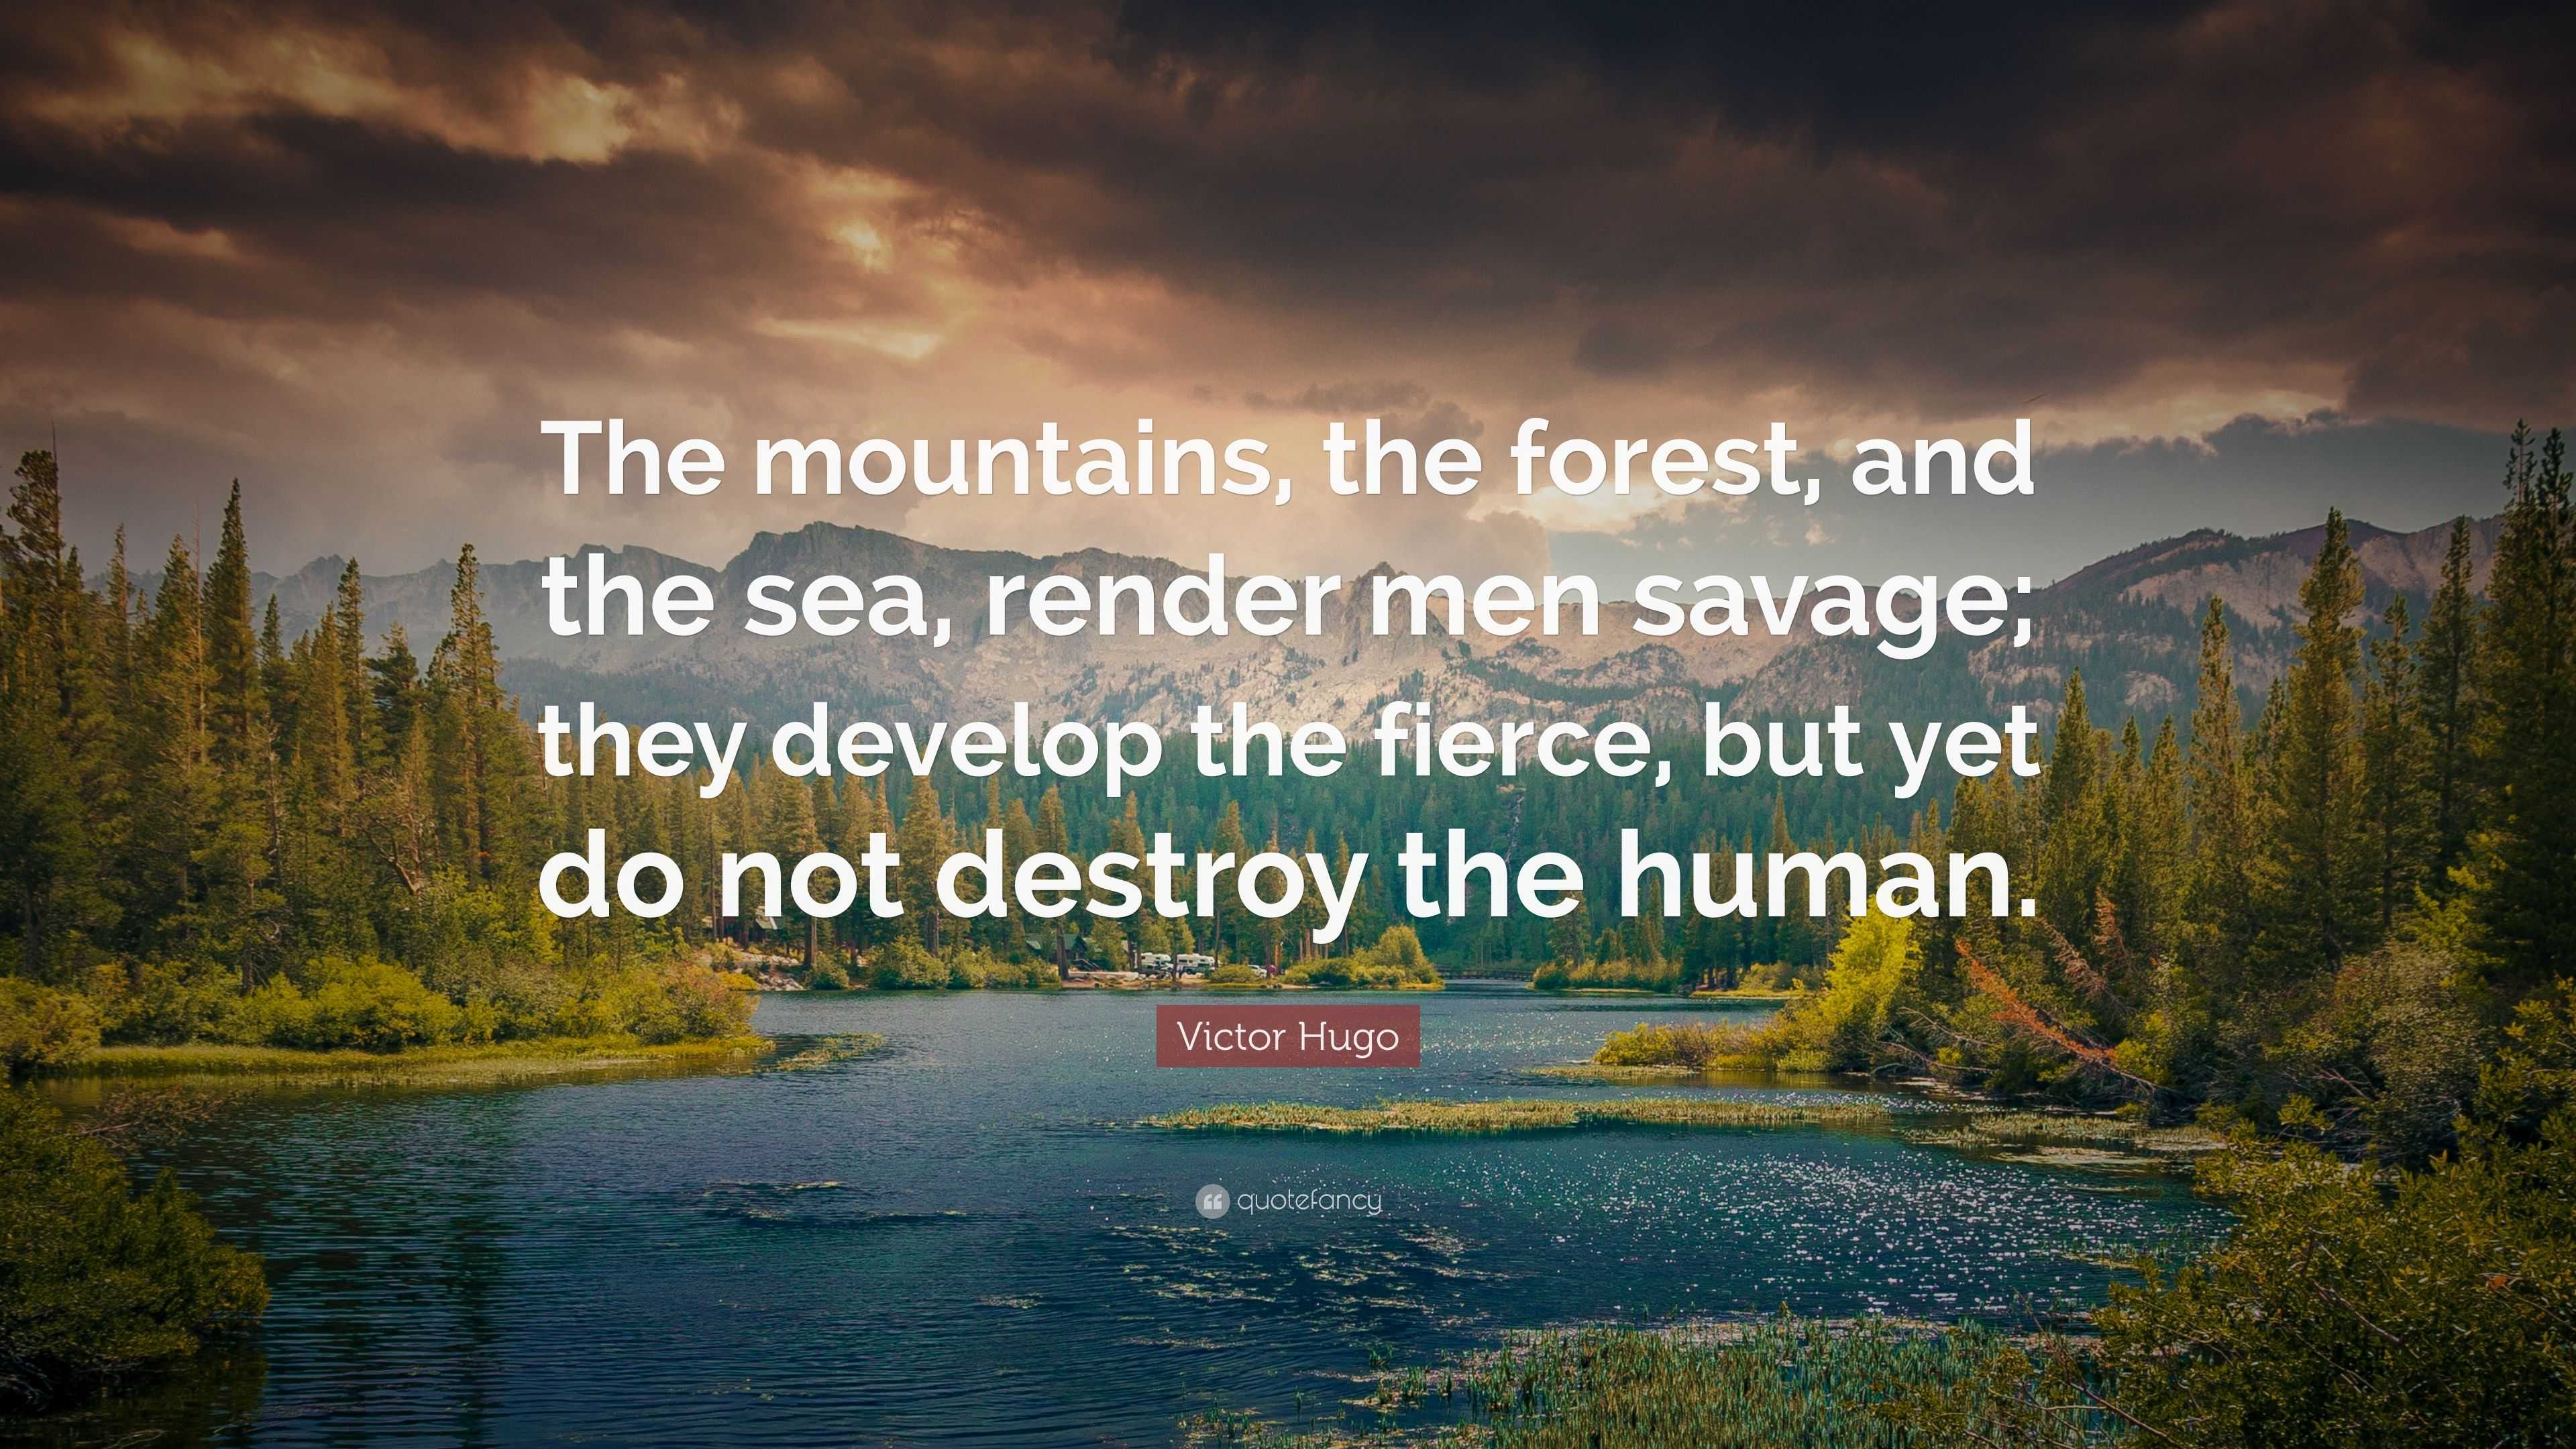 Victor Hugo Quote: “The mountains, the forest, and the sea, render men ...